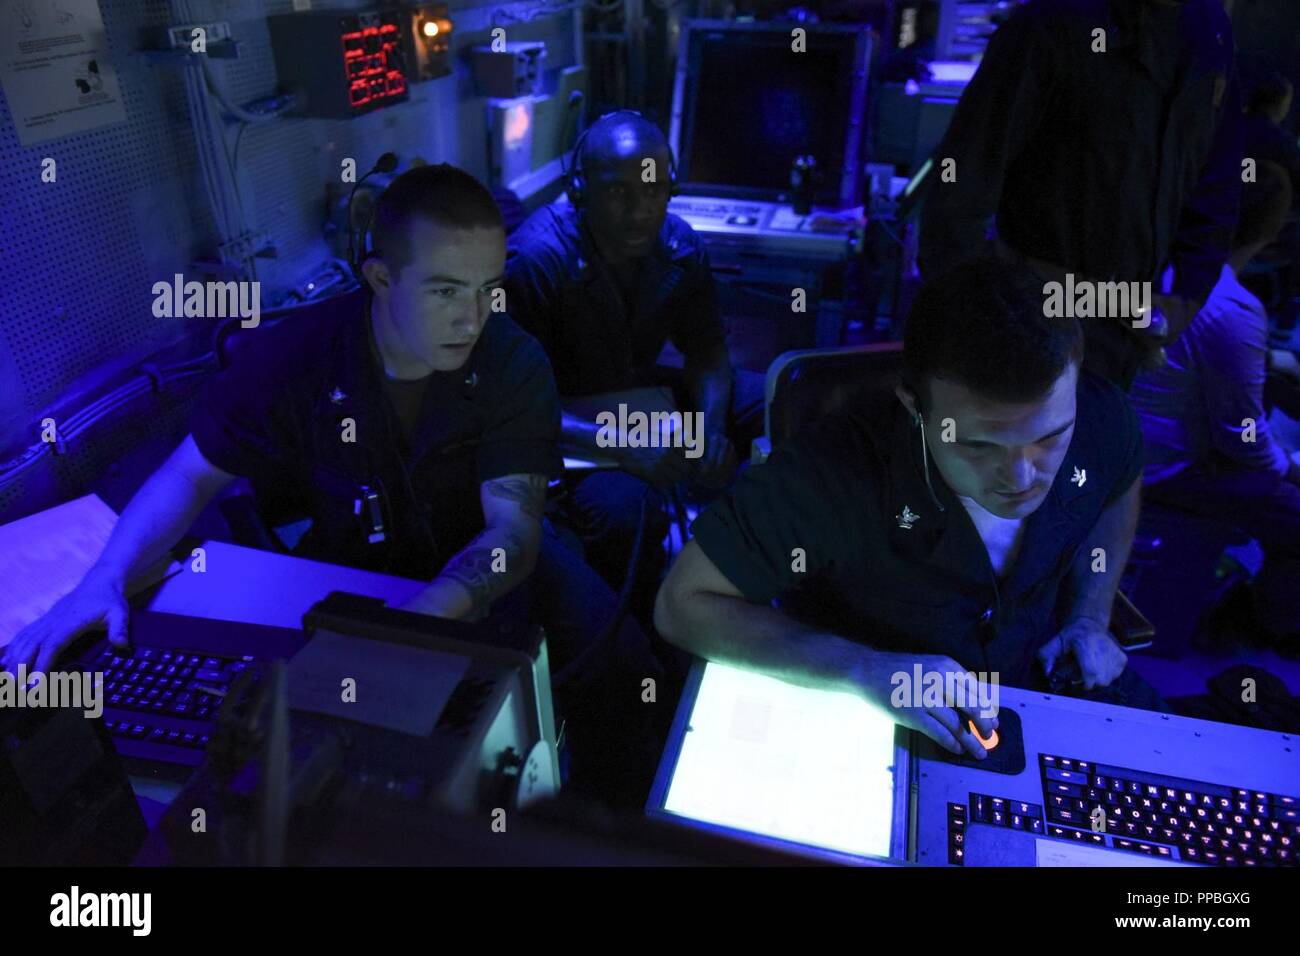 ATLANTIC OCEAN (Aug. 22, 2018) Sailors assigned to the Nimitz-class aircraft carrier USS Abraham Lincoln (CVN 72) stand watch in the ship’s carrier air traffic control center. Abraham Lincoln is currently underway conducting carrier qualifications. Stock Photo